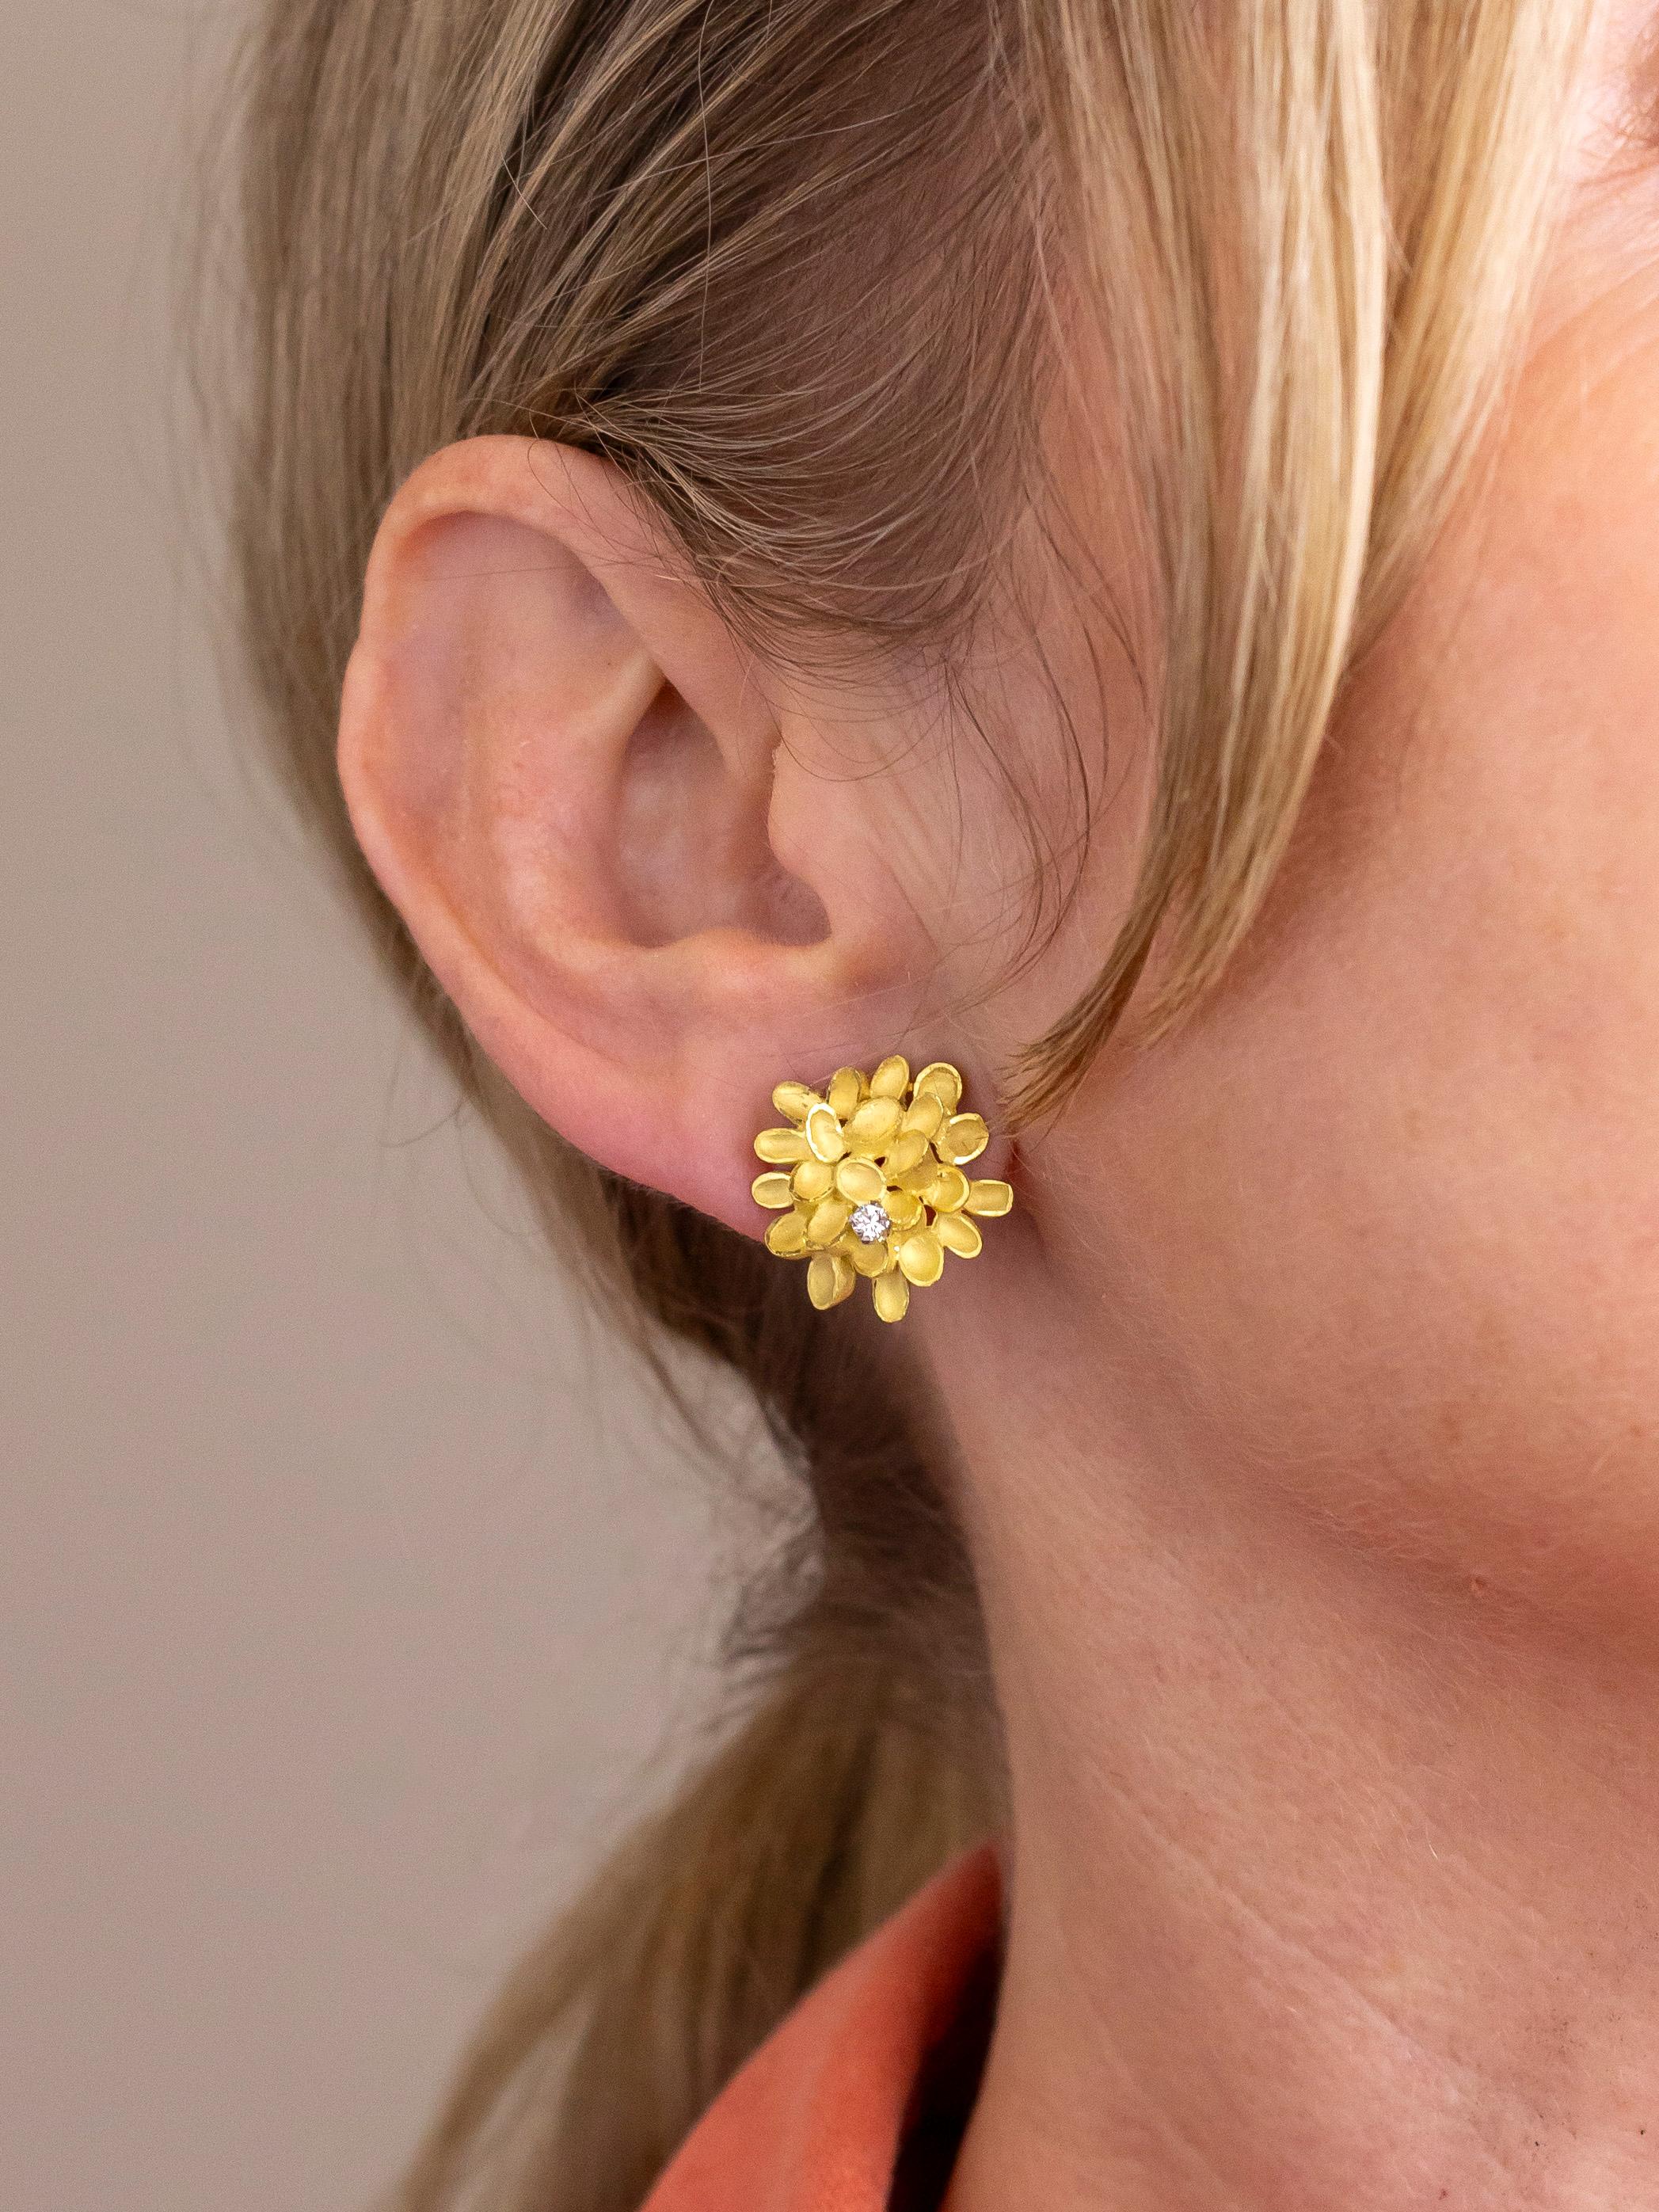 This pair of delicate ear clips are crafted from 18 karat yellow gold and are each set with a round brilliant cut diamond. The clips are by famed London jeweller Andrew Grima who has been described as 'the father of modernist jewellery' and was